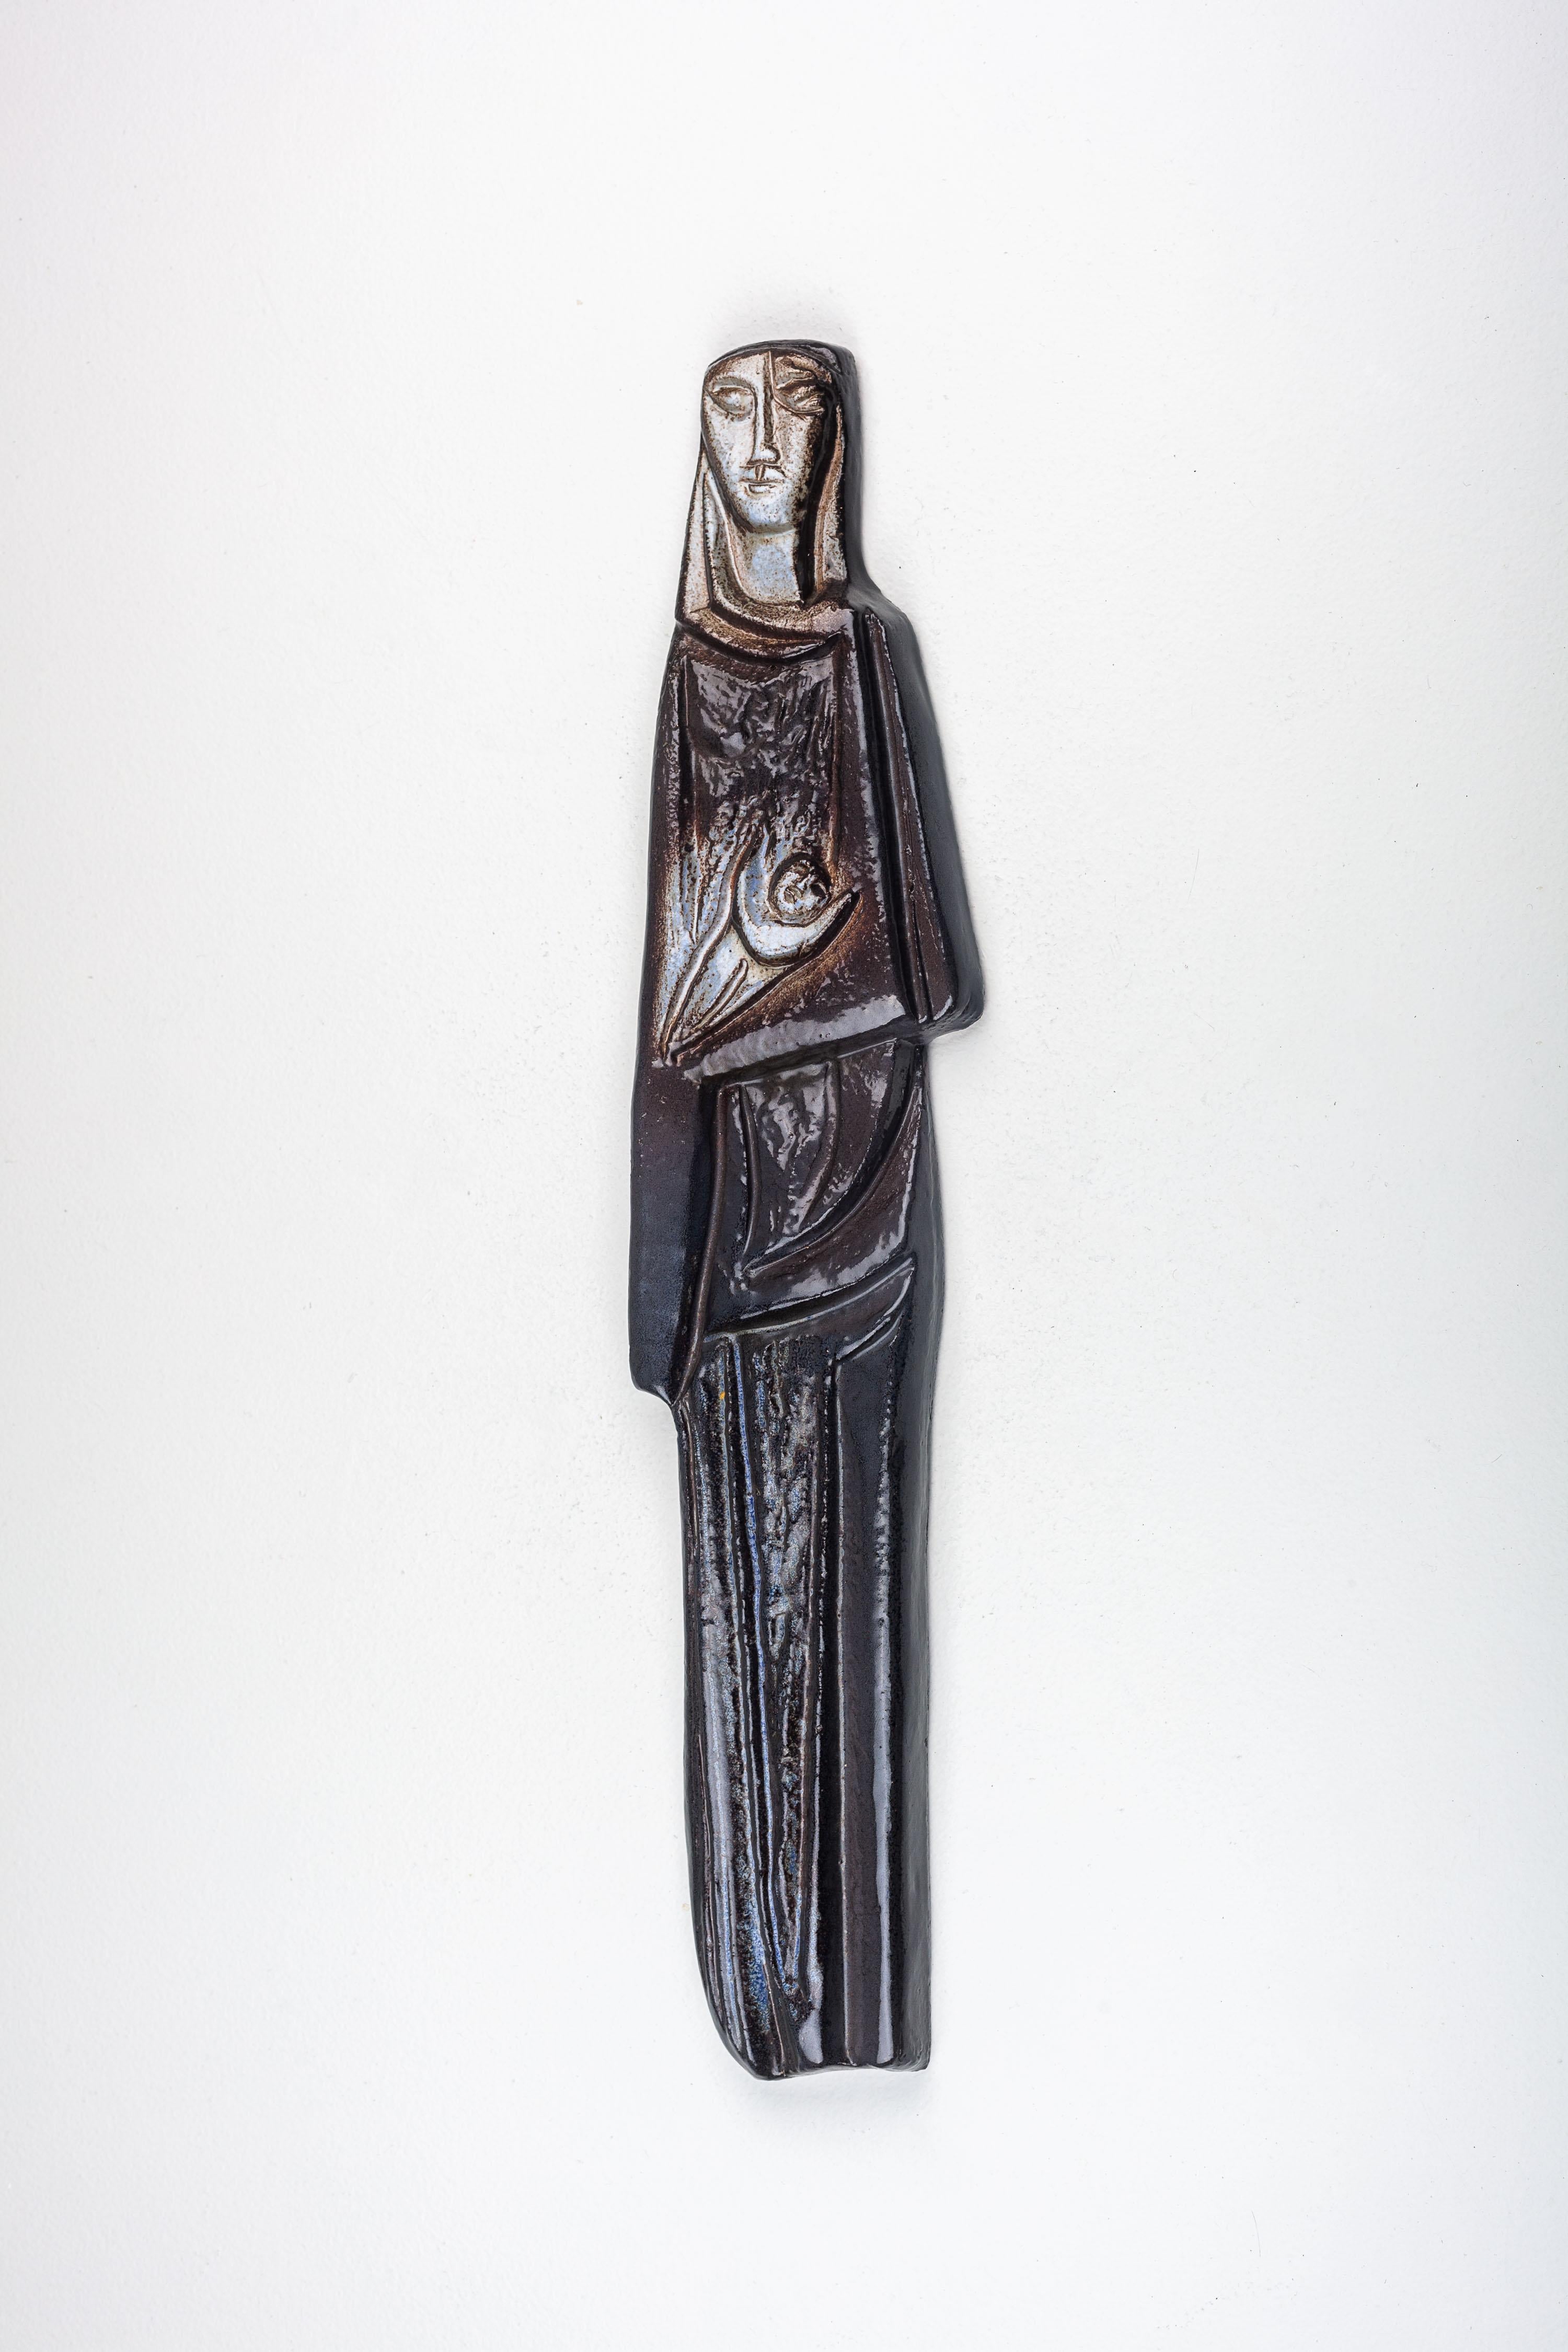 Mid-20th Century Virgin Mary & Child Jesus Wall Decoration, German Expressionism Bauhaus Art Deco For Sale